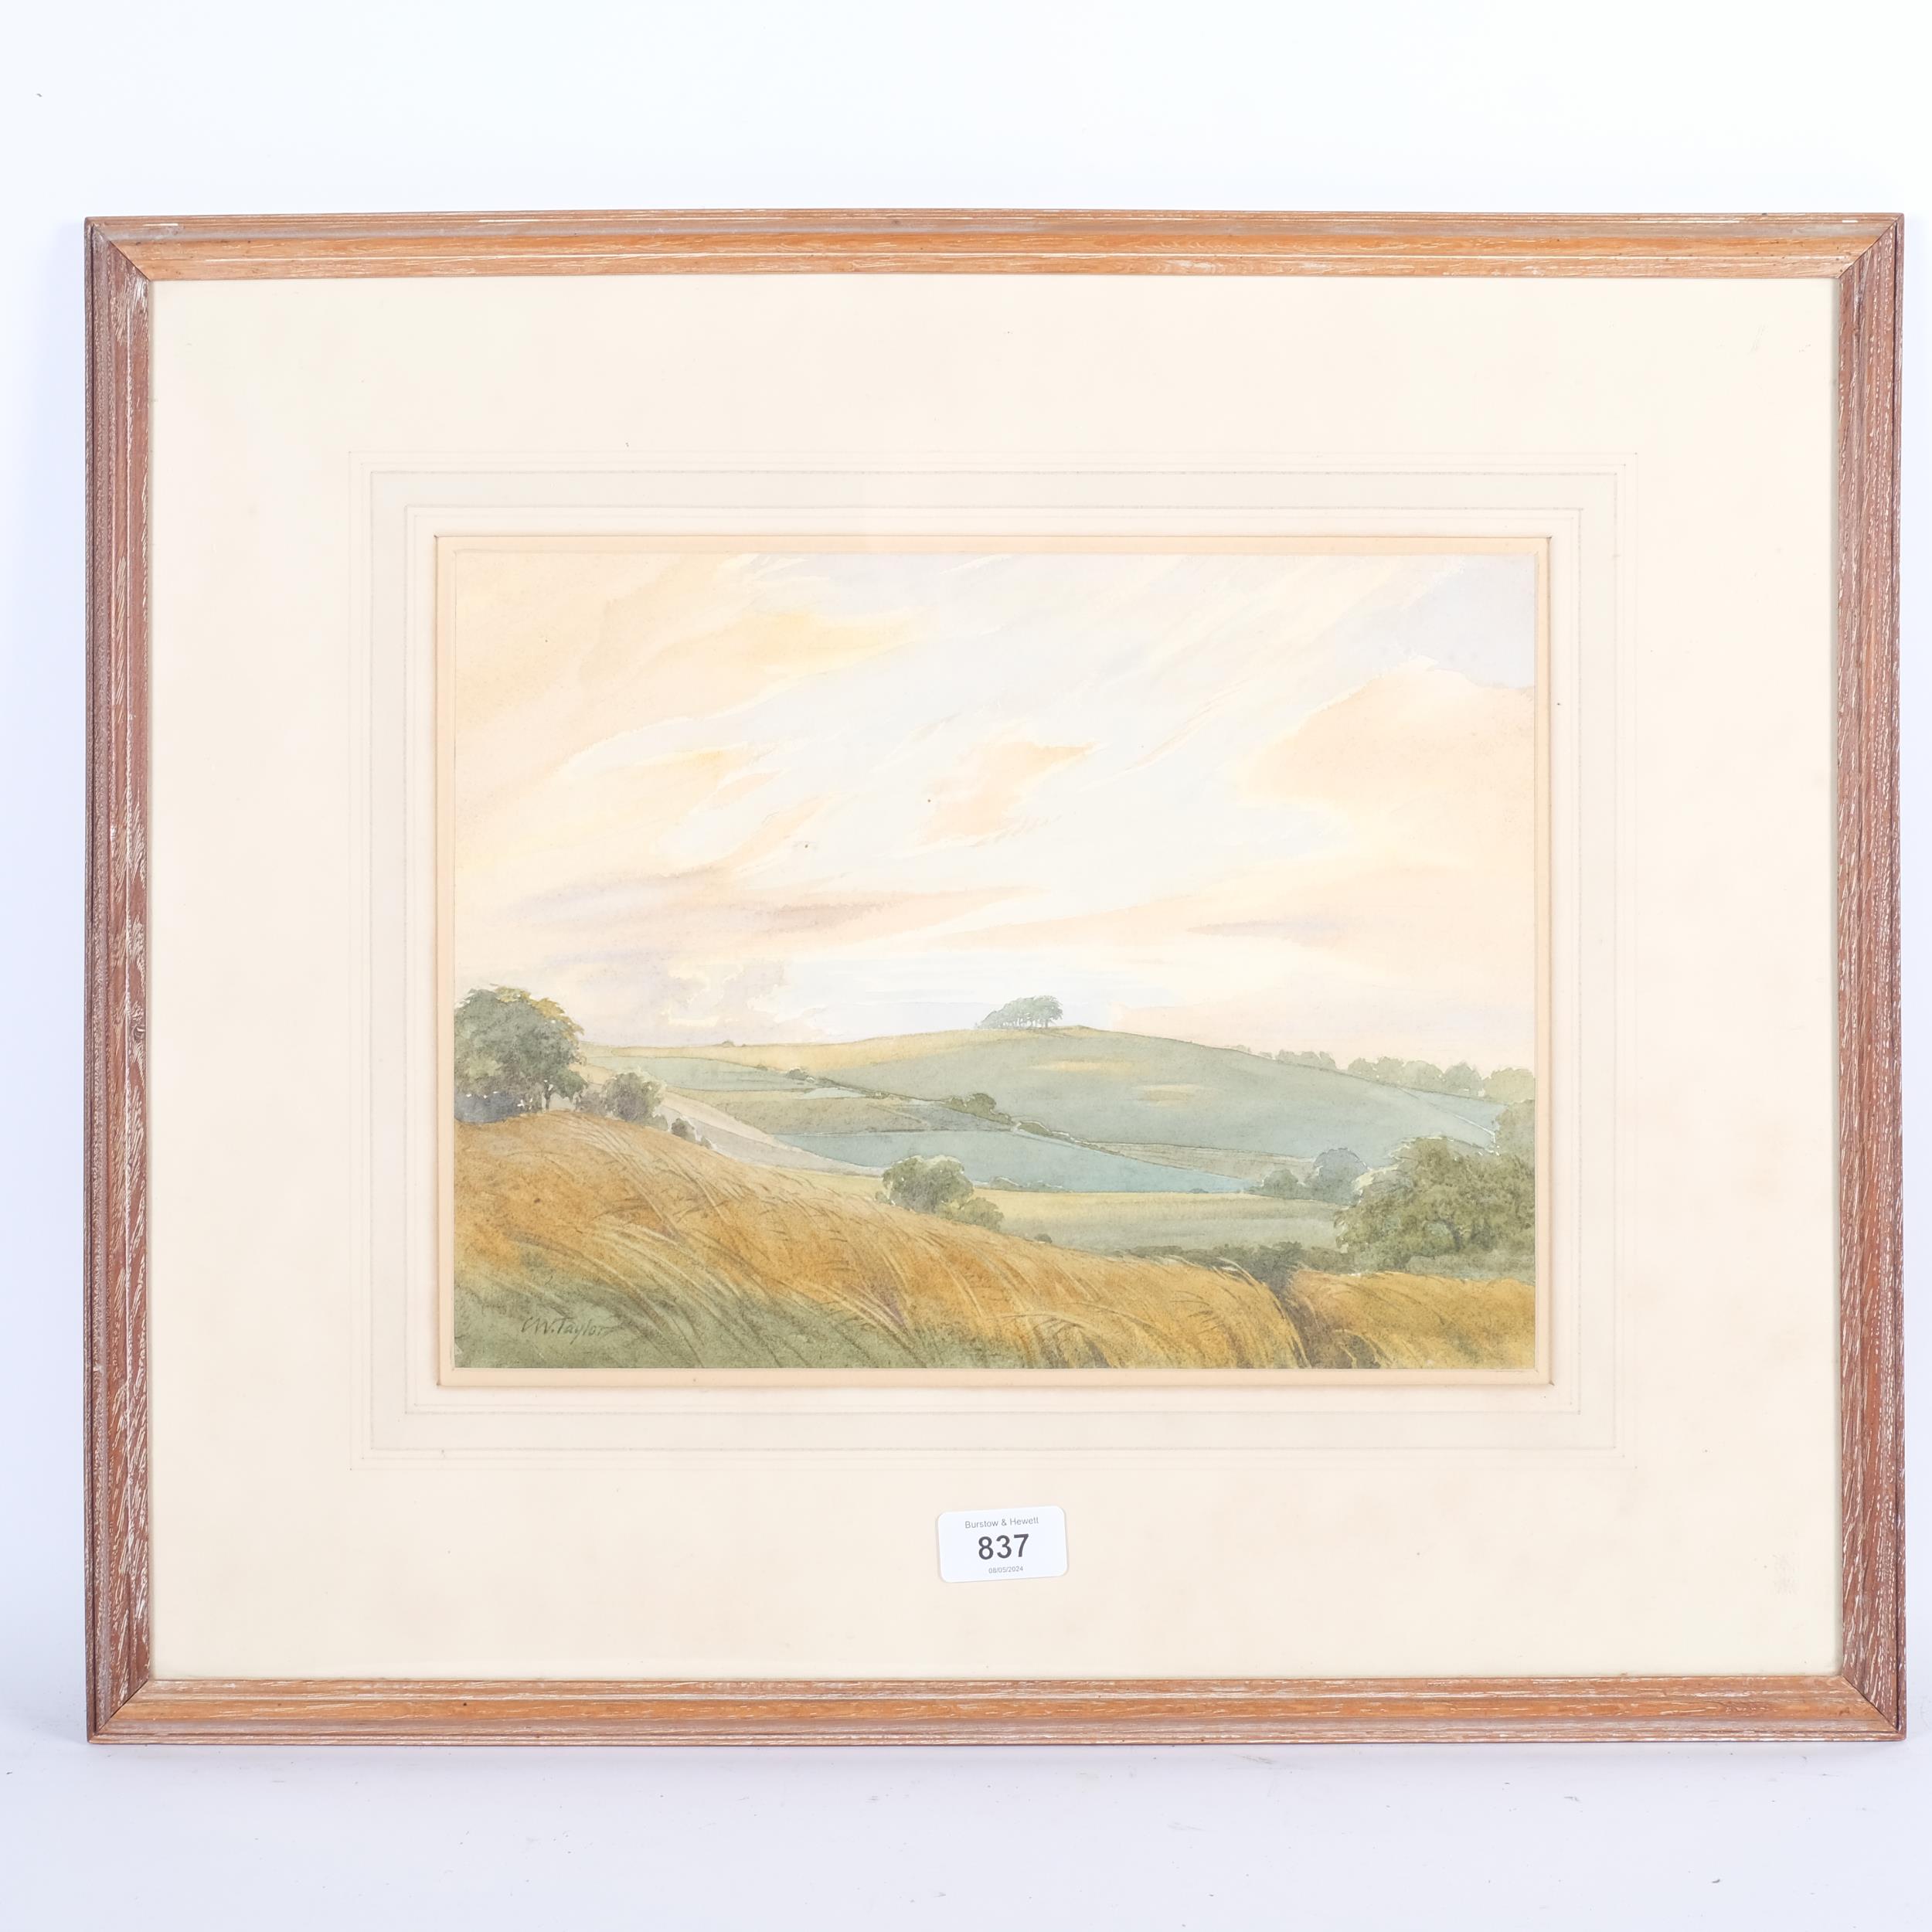 C W Taylor, watercolour view, "Muntham Clump, Sunset", in limed oak frame, 46cm x 55cm - Image 2 of 2